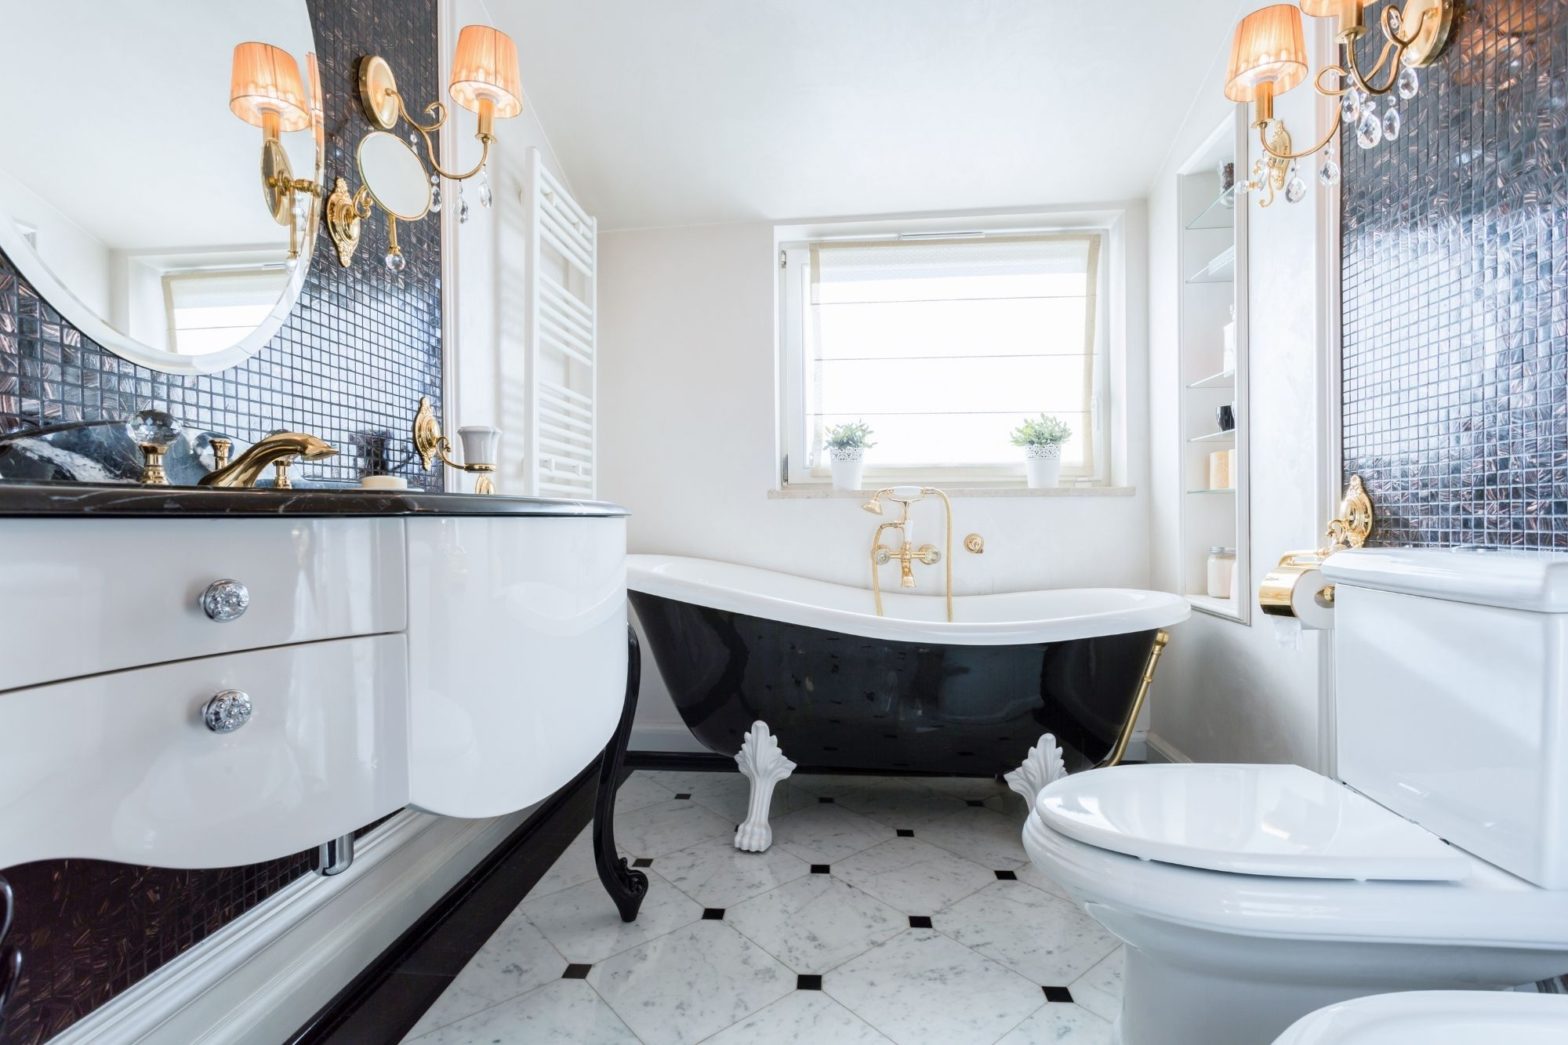 Contact RUPP to Do a Complete Bath Remodel, or to Do Any Minor Remodel Project in Your Existing Bathroom.